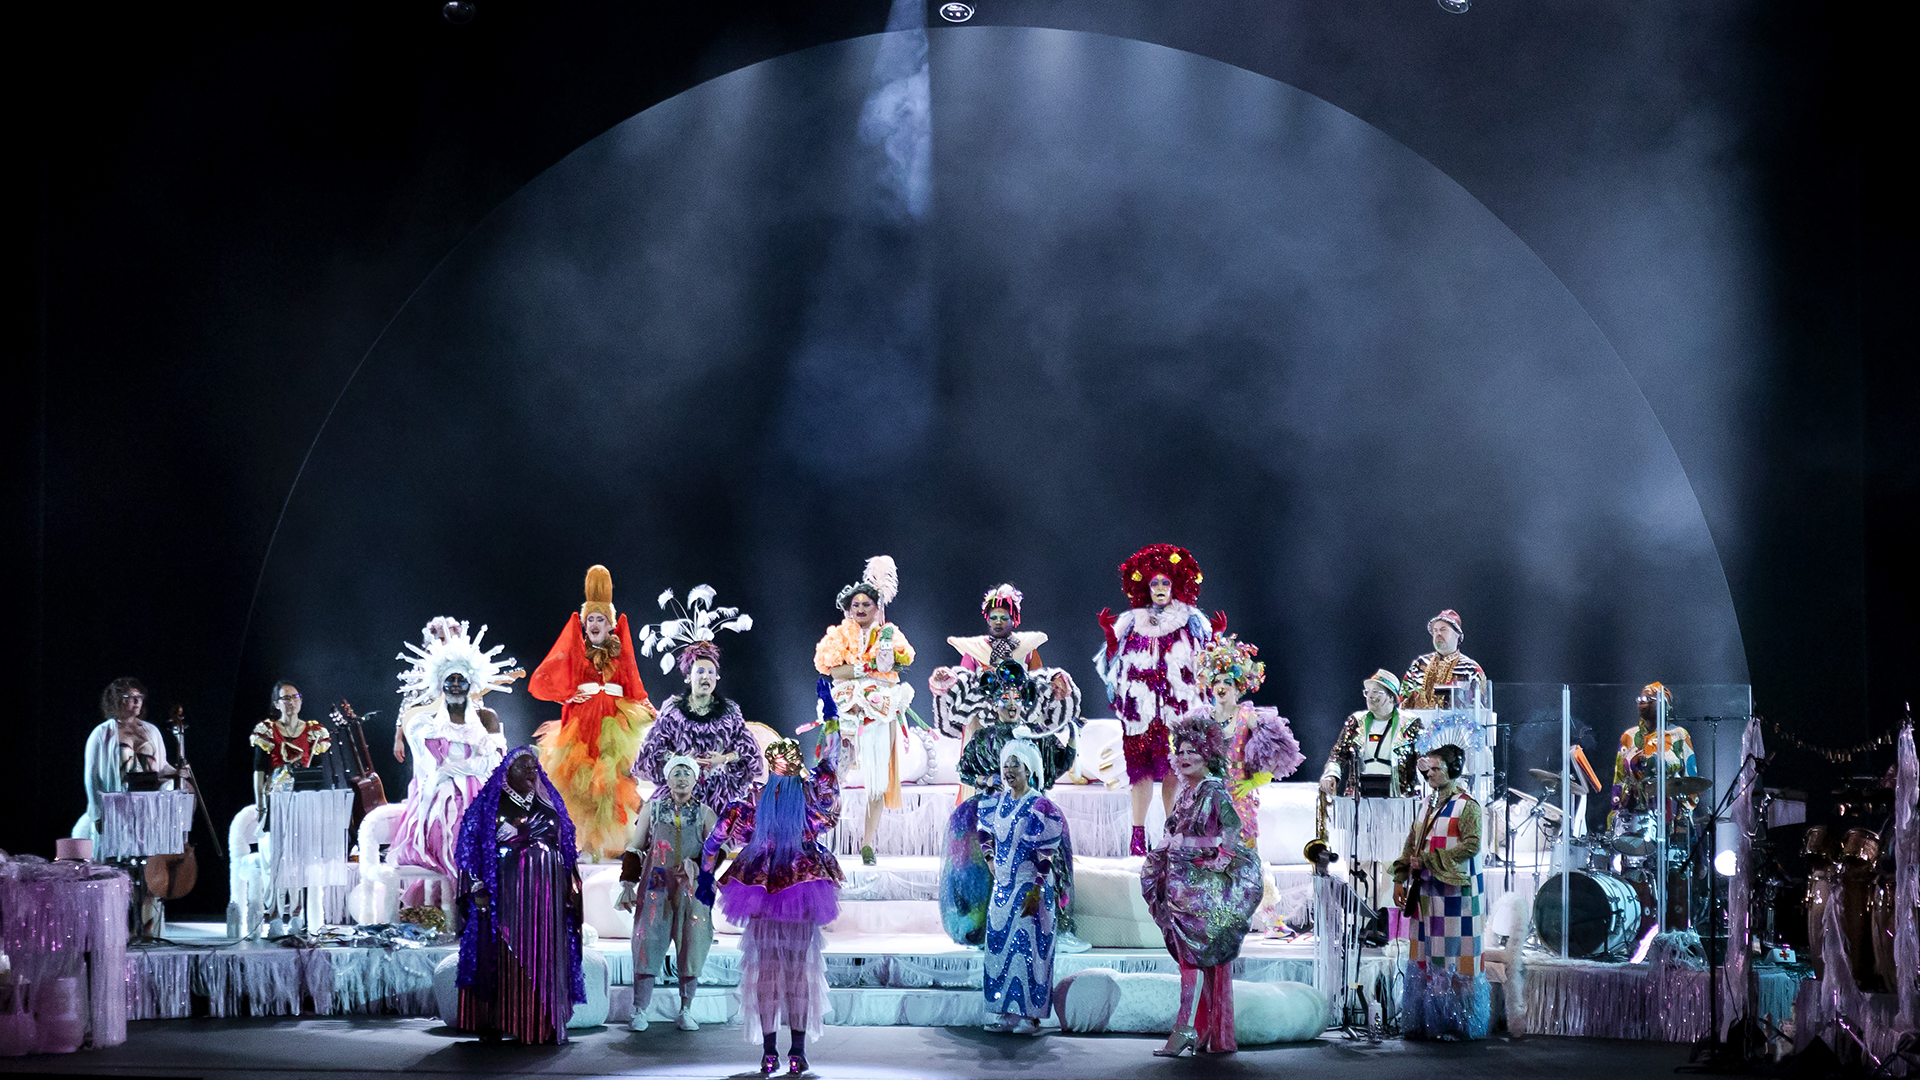 22 performers stand on stage, all dressed in vibrant costumes, sing a song together with a shape of a moon projected on the wall behind them